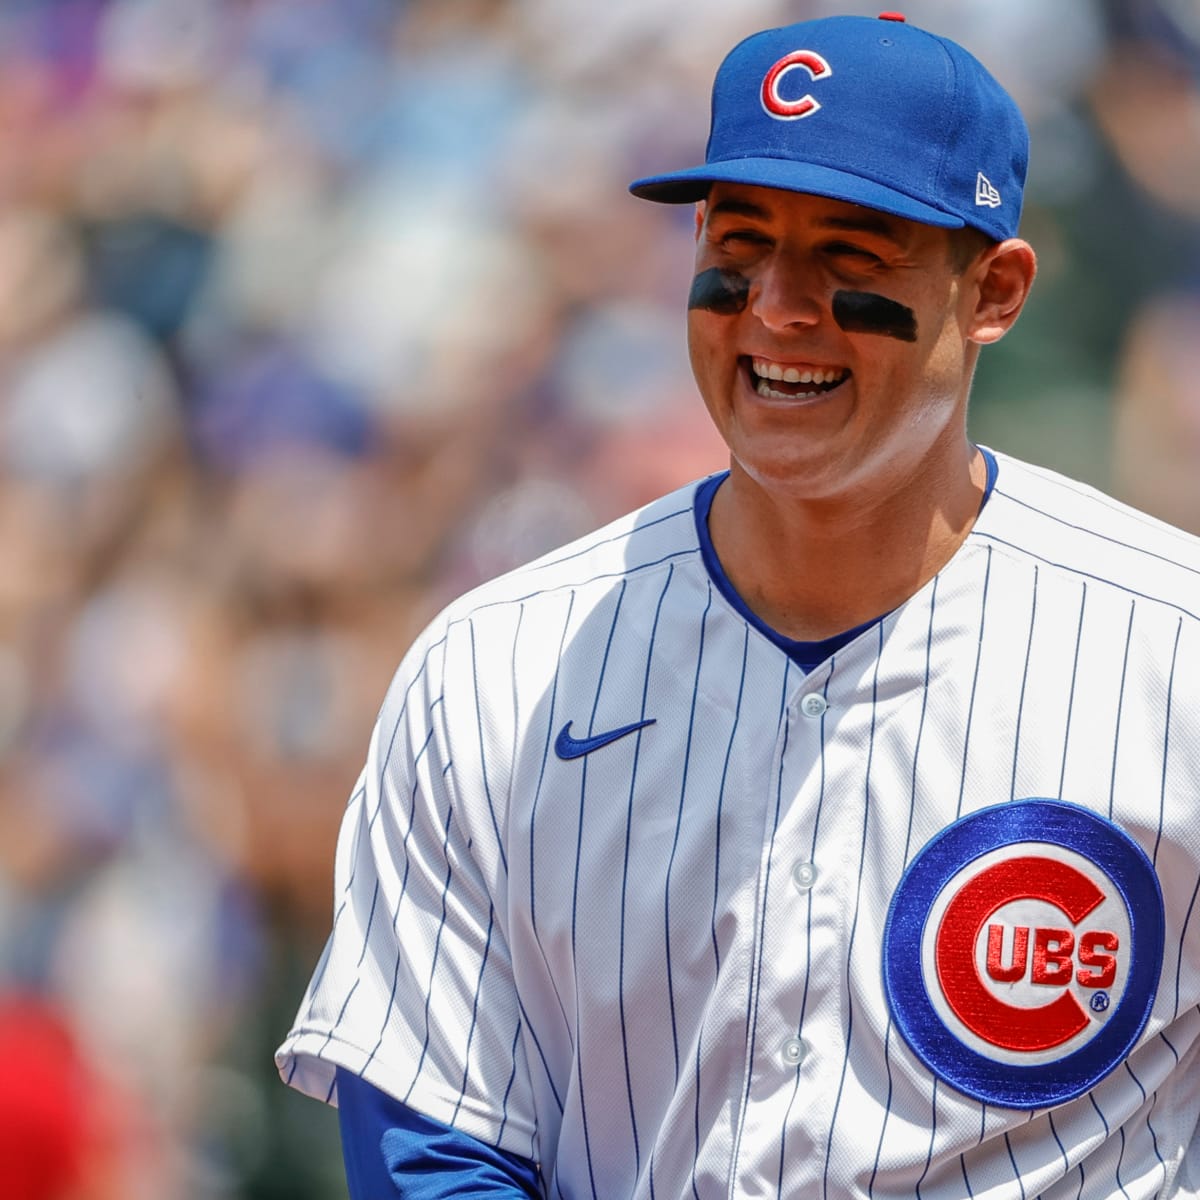 MLB rumors: Yankees trade for Cubs' Anthony Rizzo